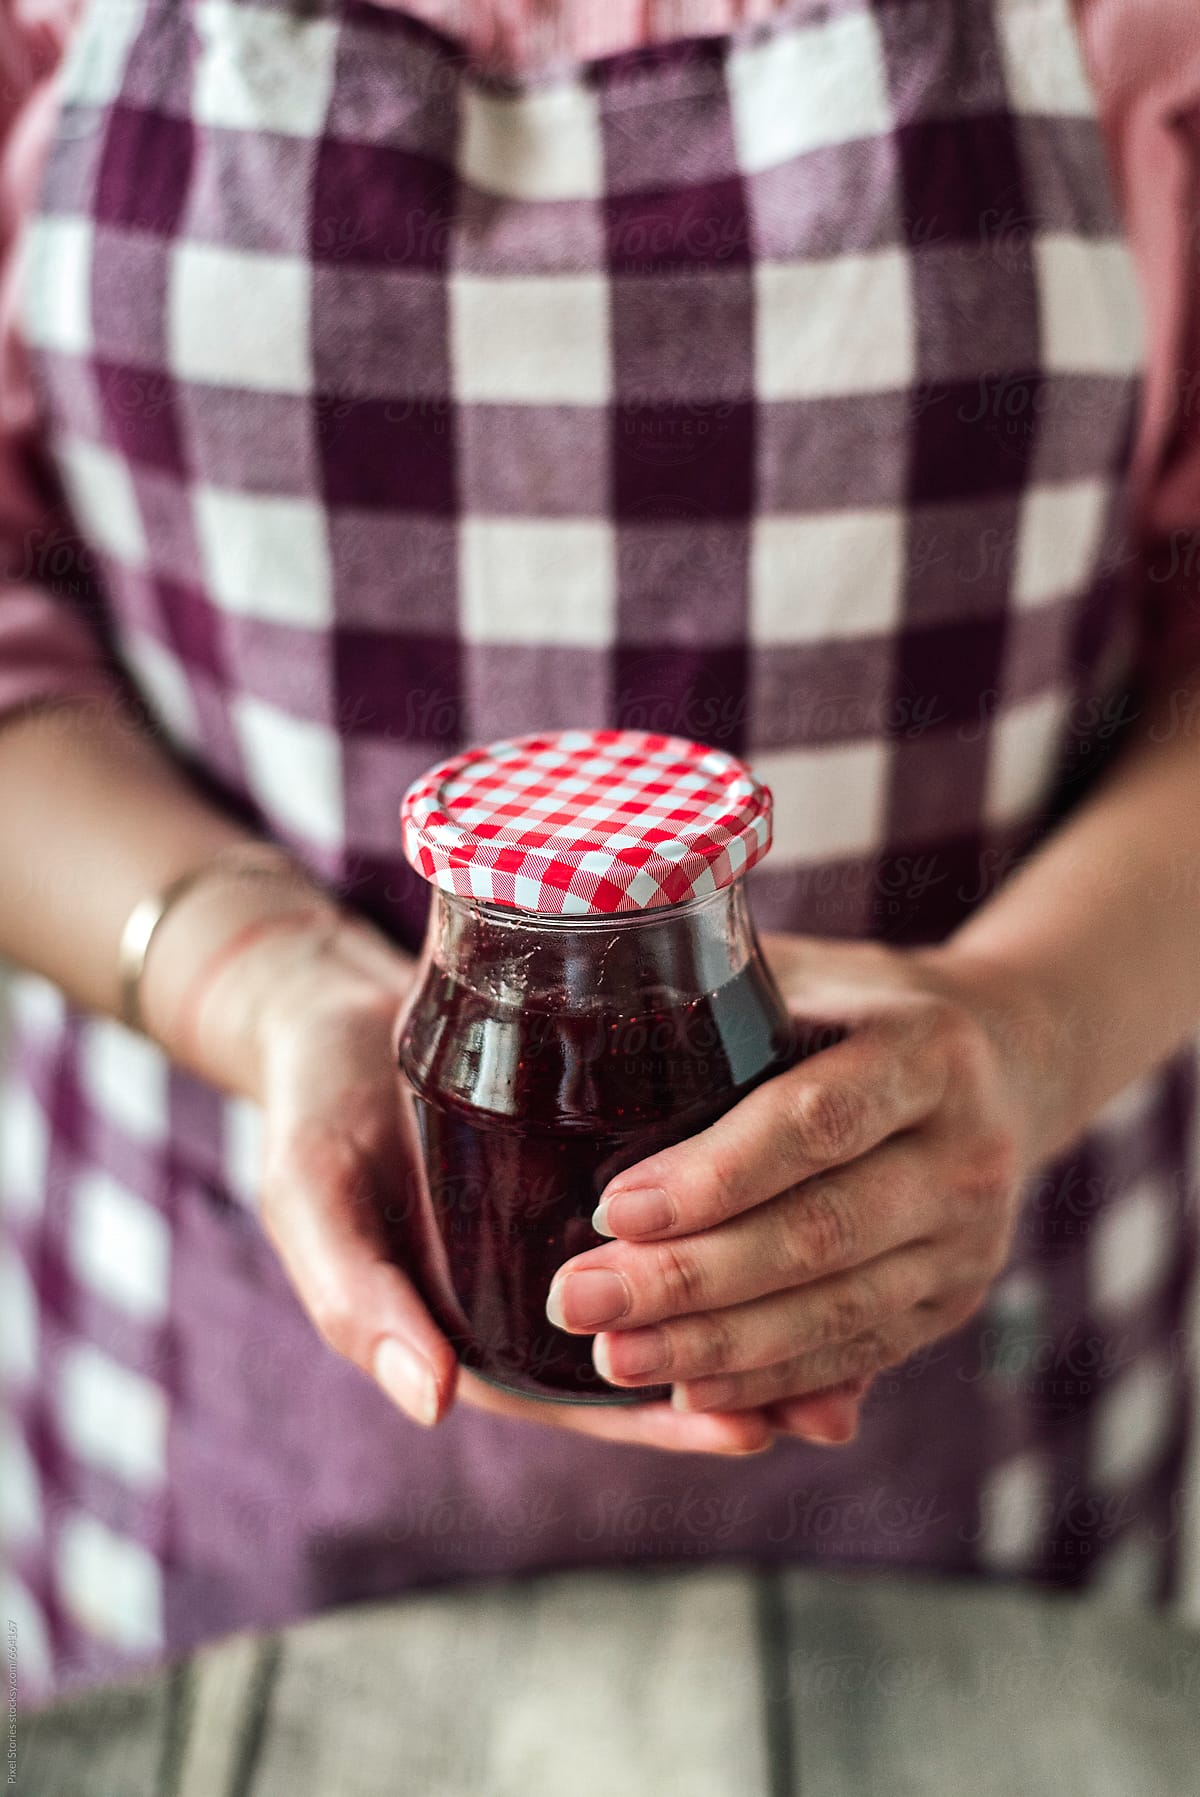 Hand holding jar filled with homemade strawberry jam